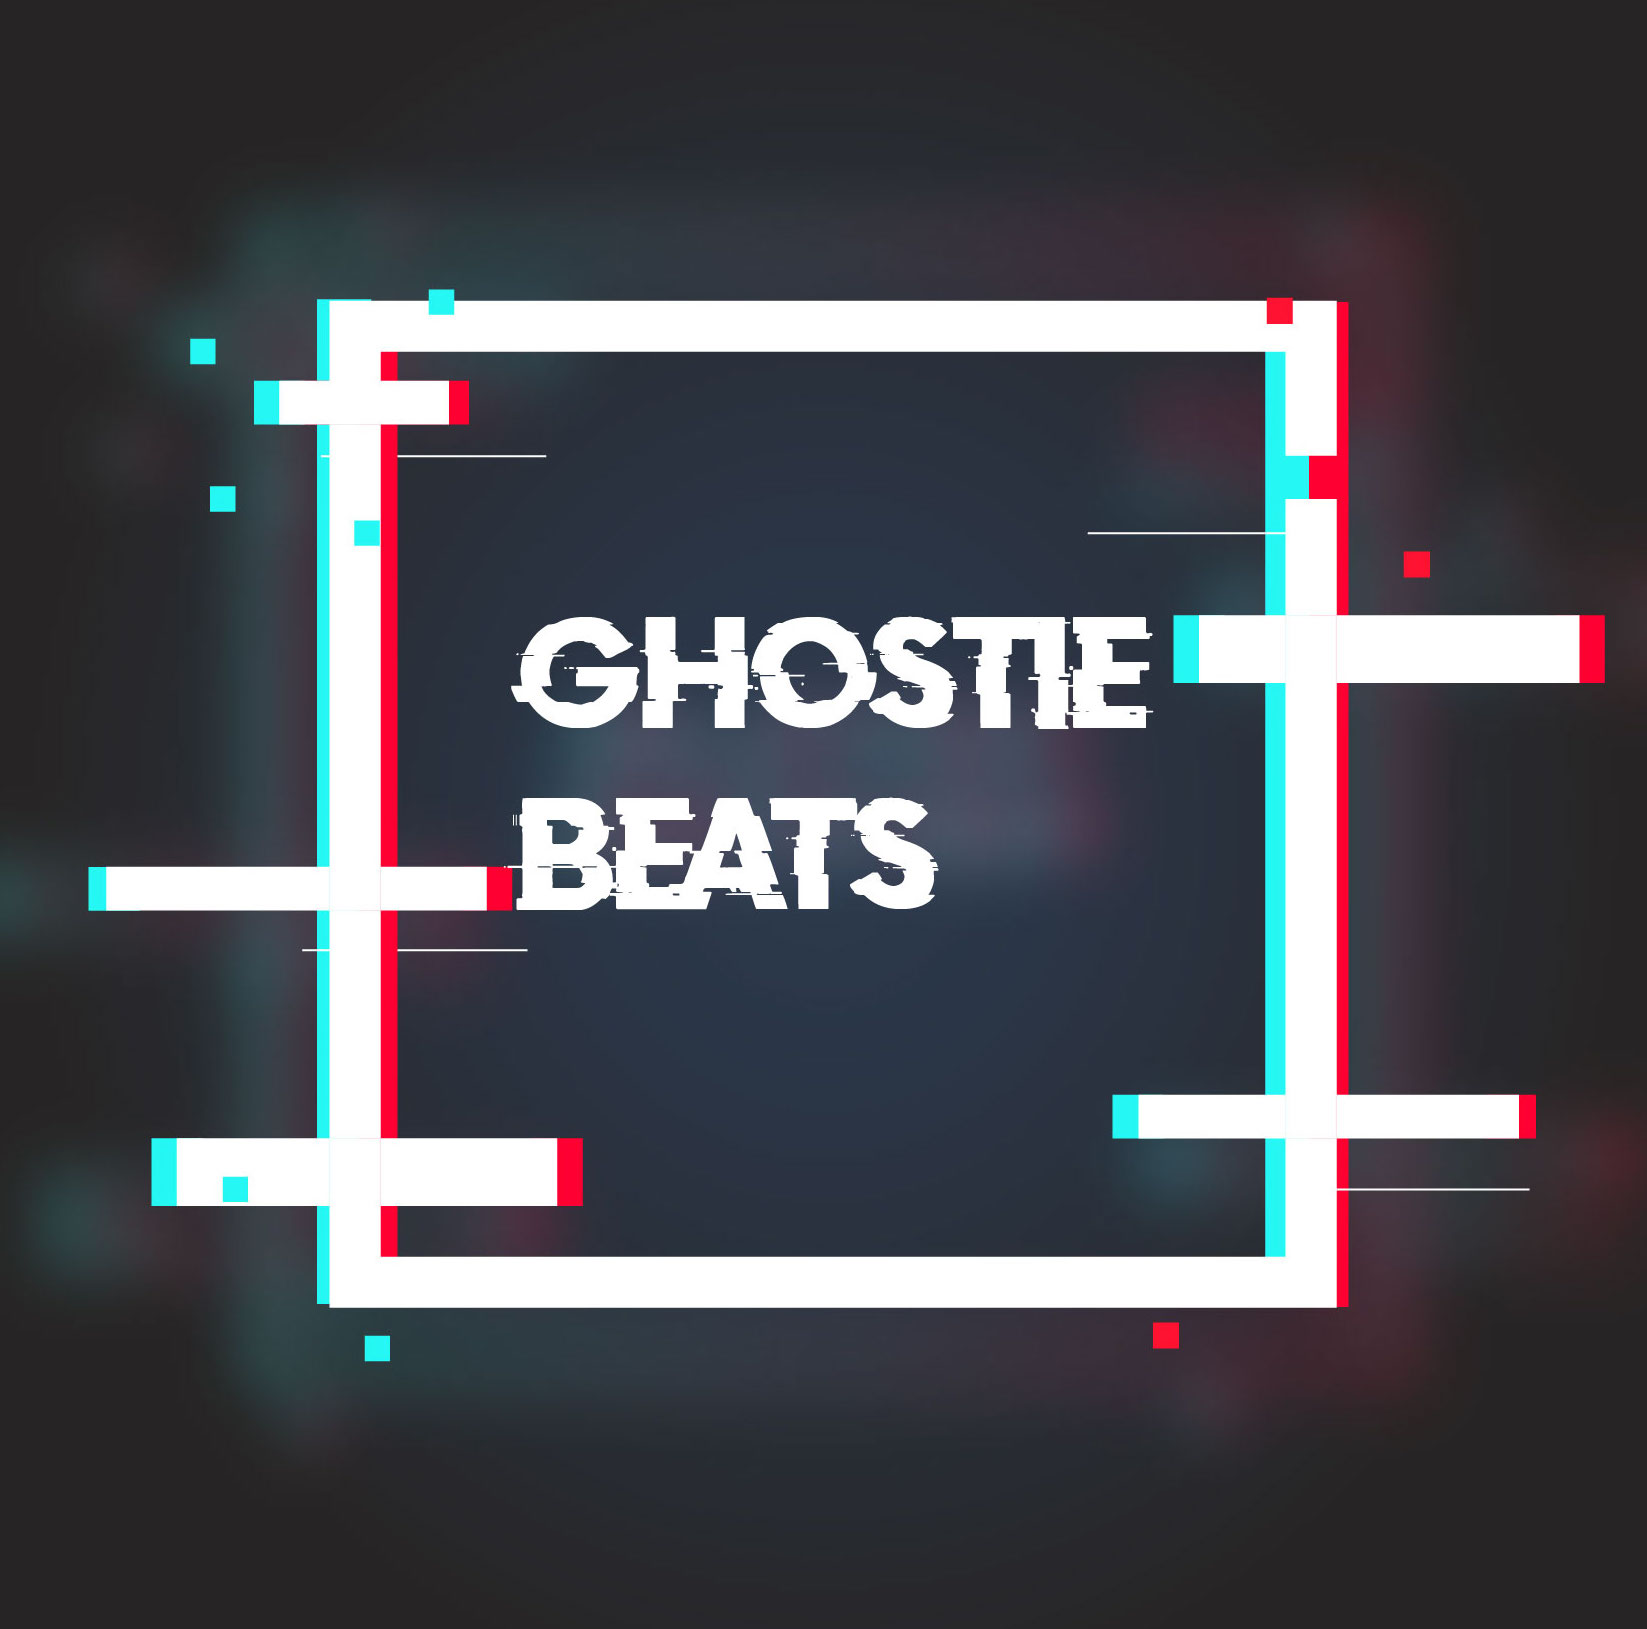 Ghostie Beats track ghost producer